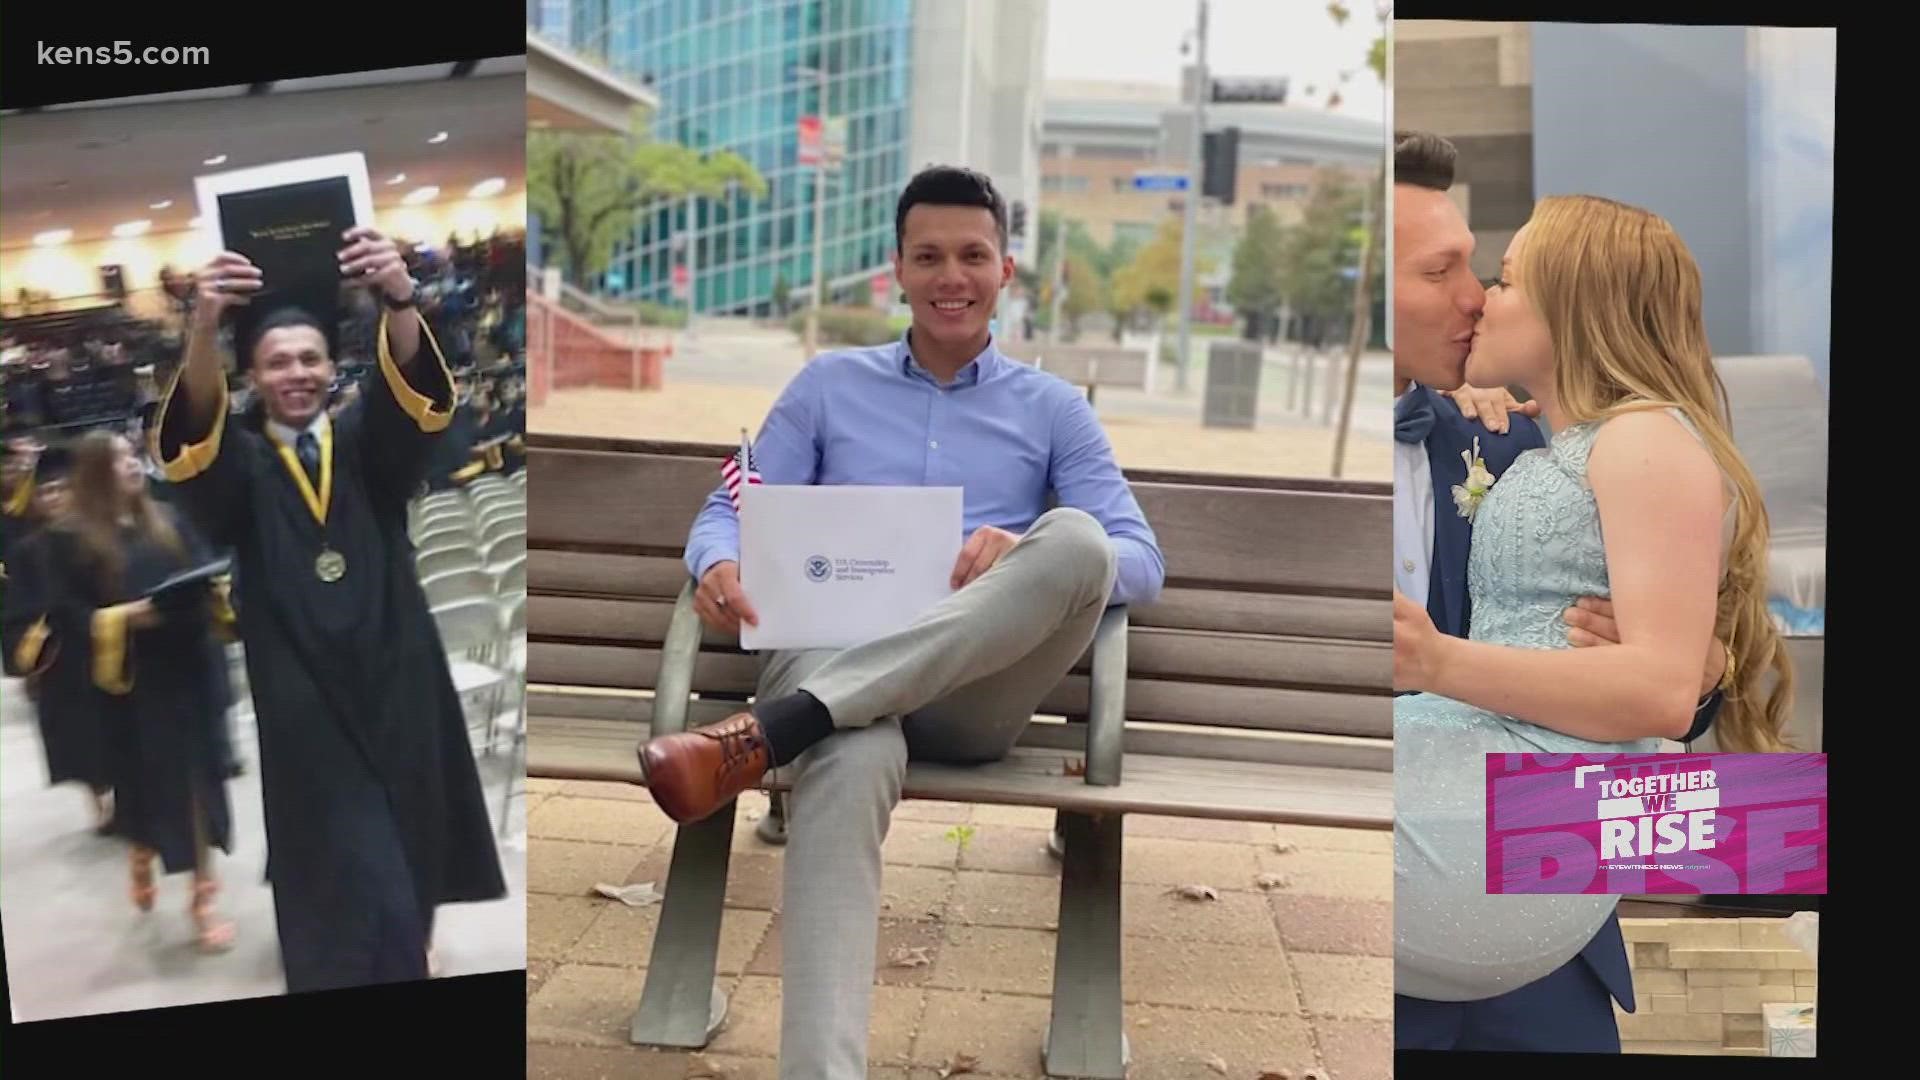 After a Honduran mother left to provide for her family in the U.S., her 17-year-old son took the same journey—and found his second chance at life.